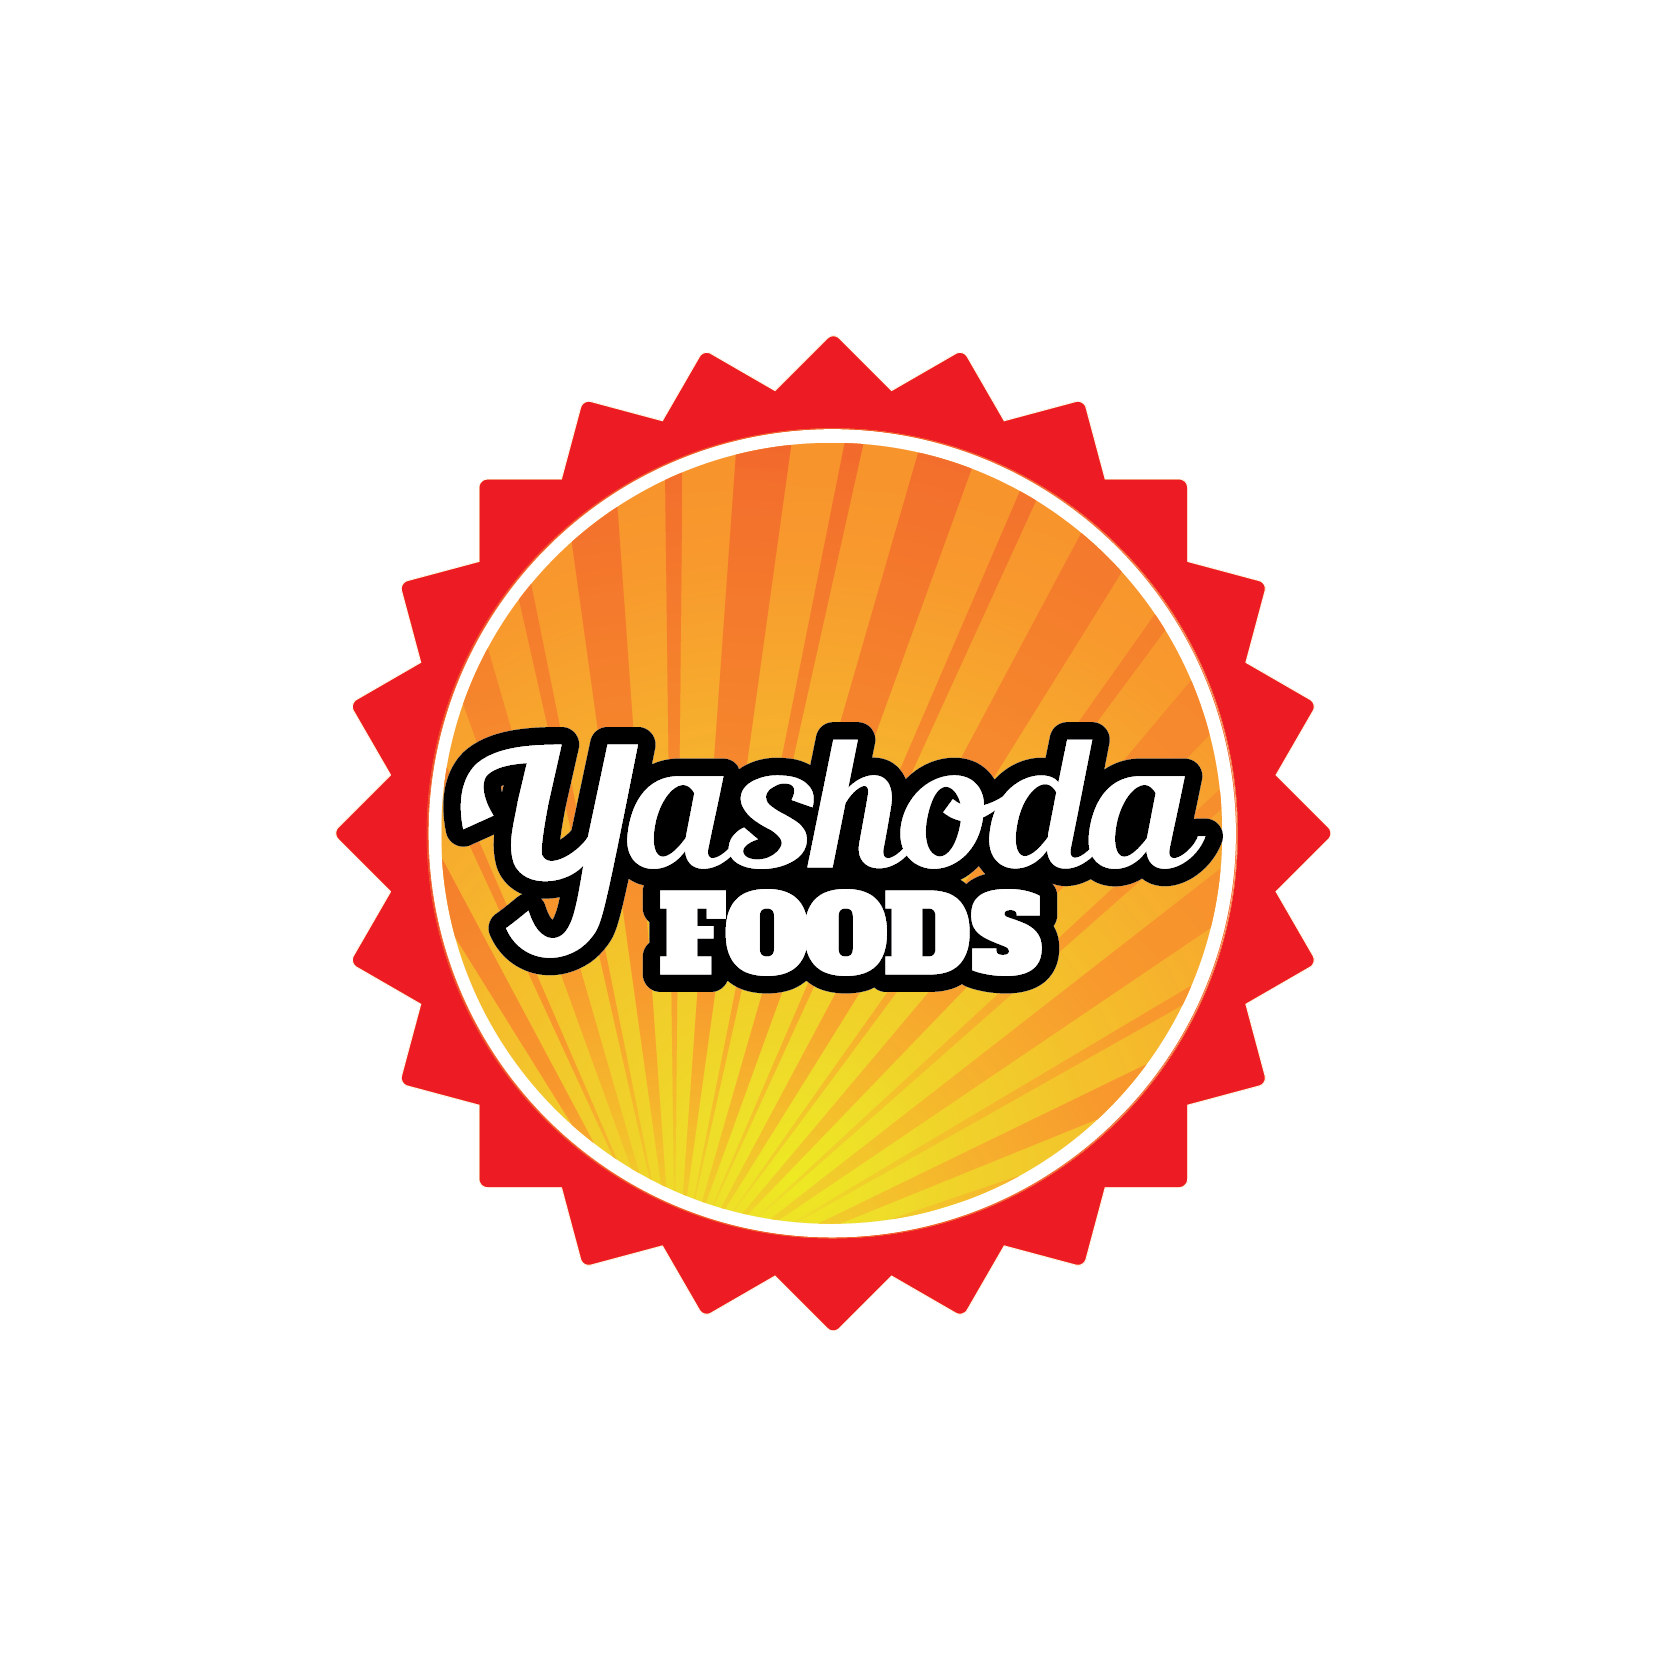 Yashoda foods revolutionizes global noodle market with authentic flavors & ethical practices